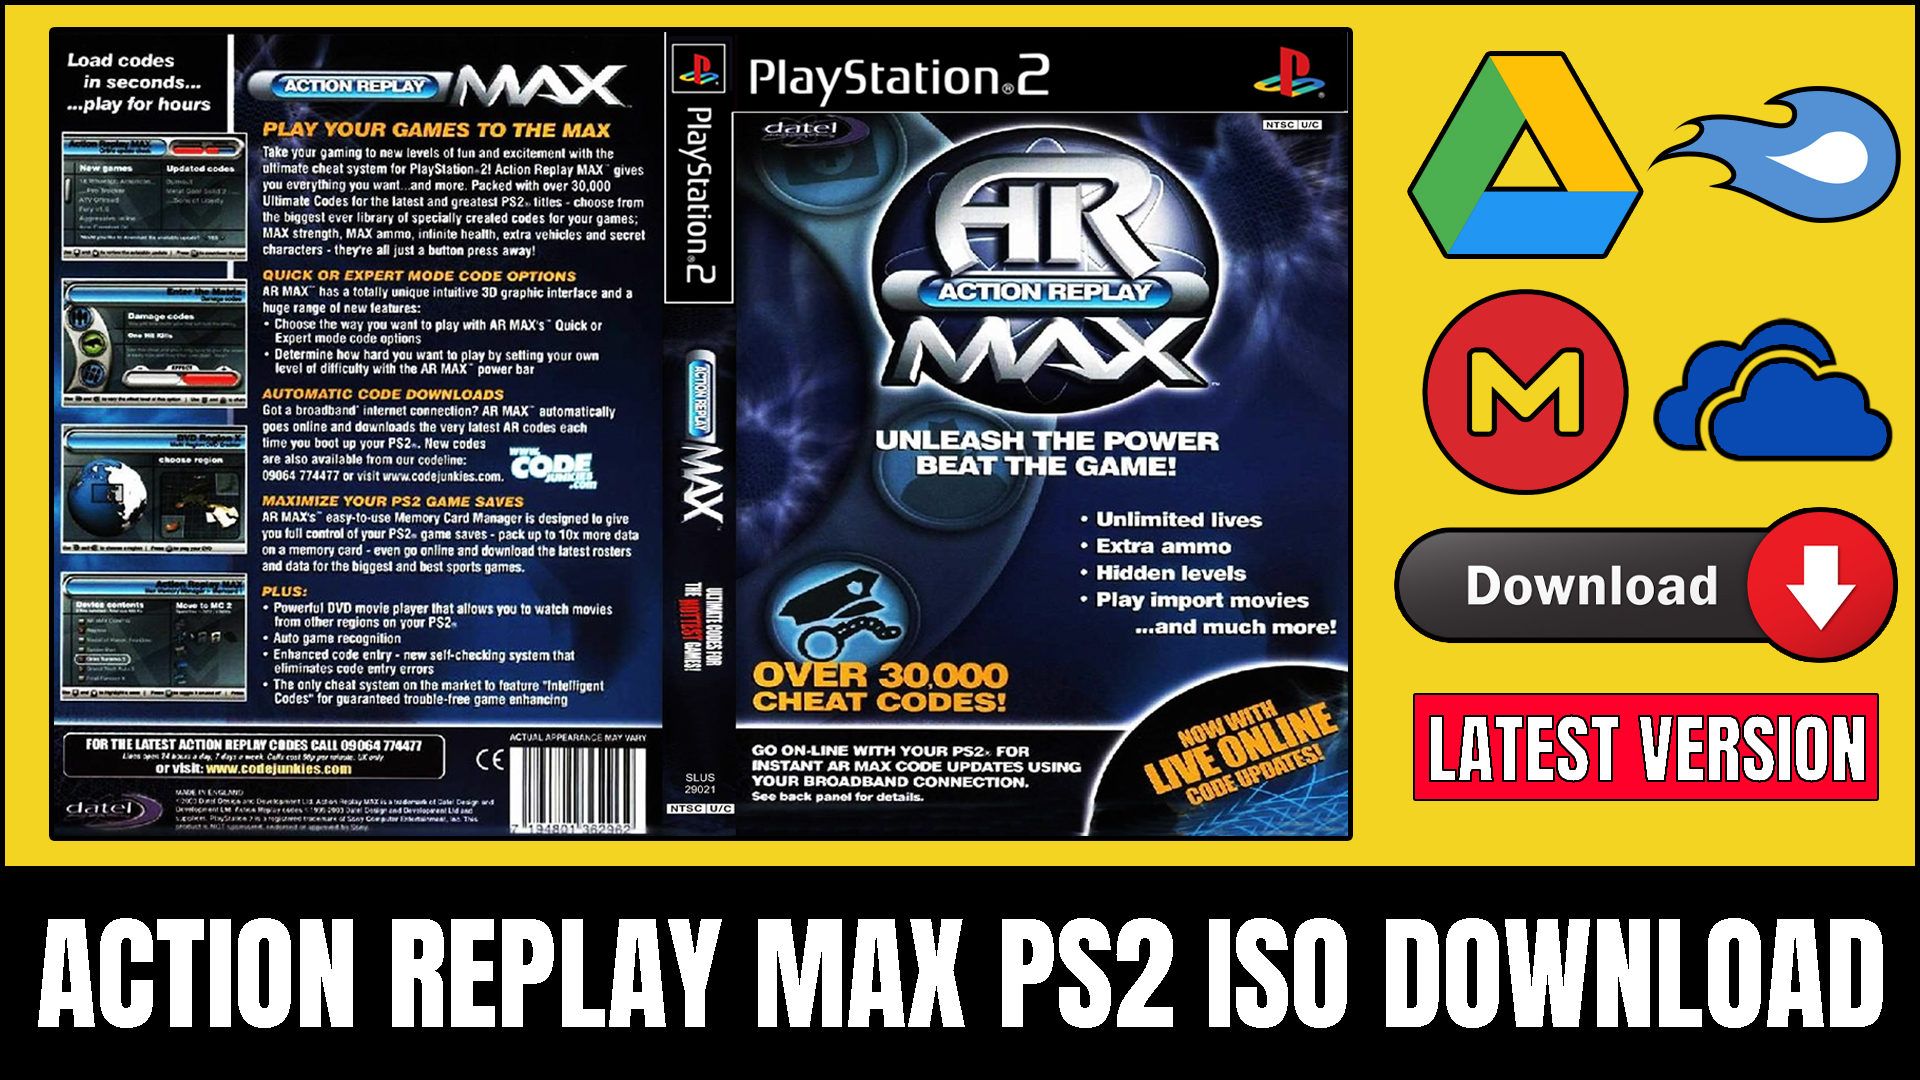 Action Replay Max PS2 ISO Download